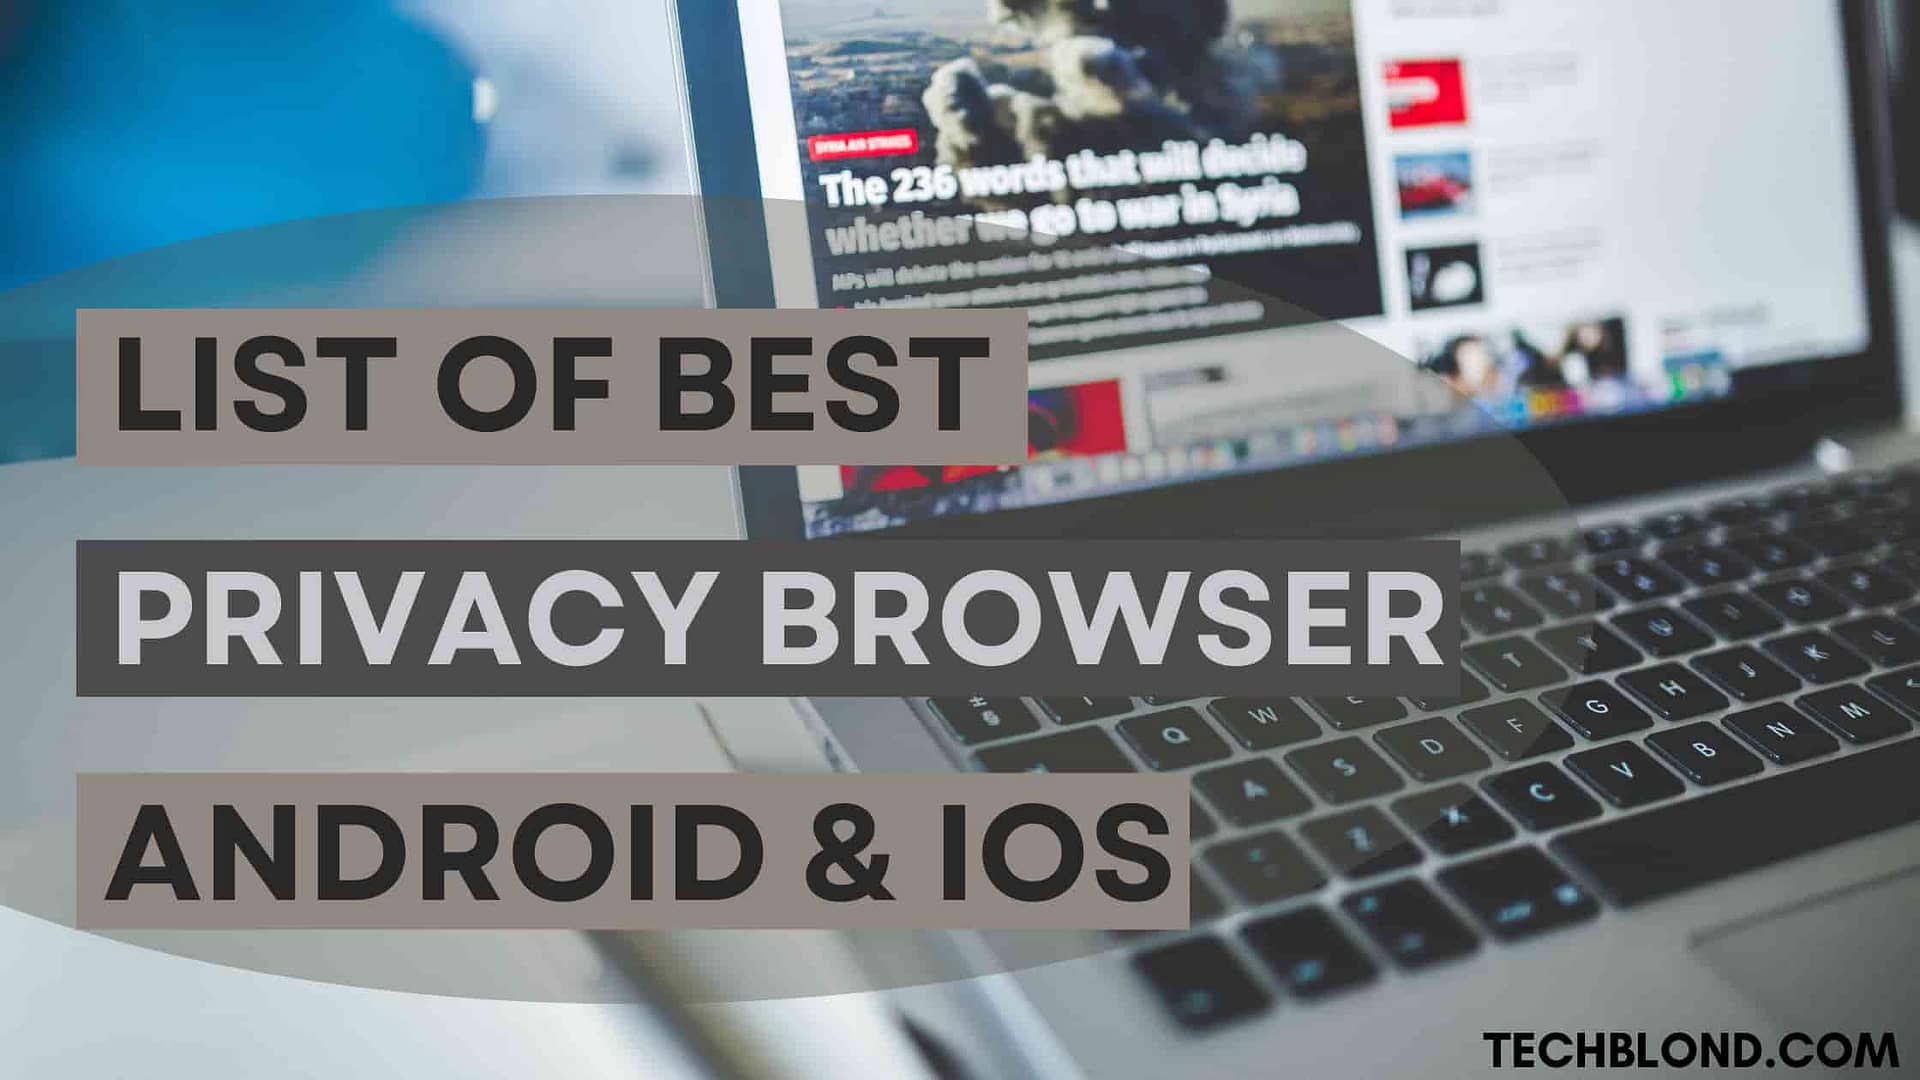 Best Privacy Browser Android & iOS